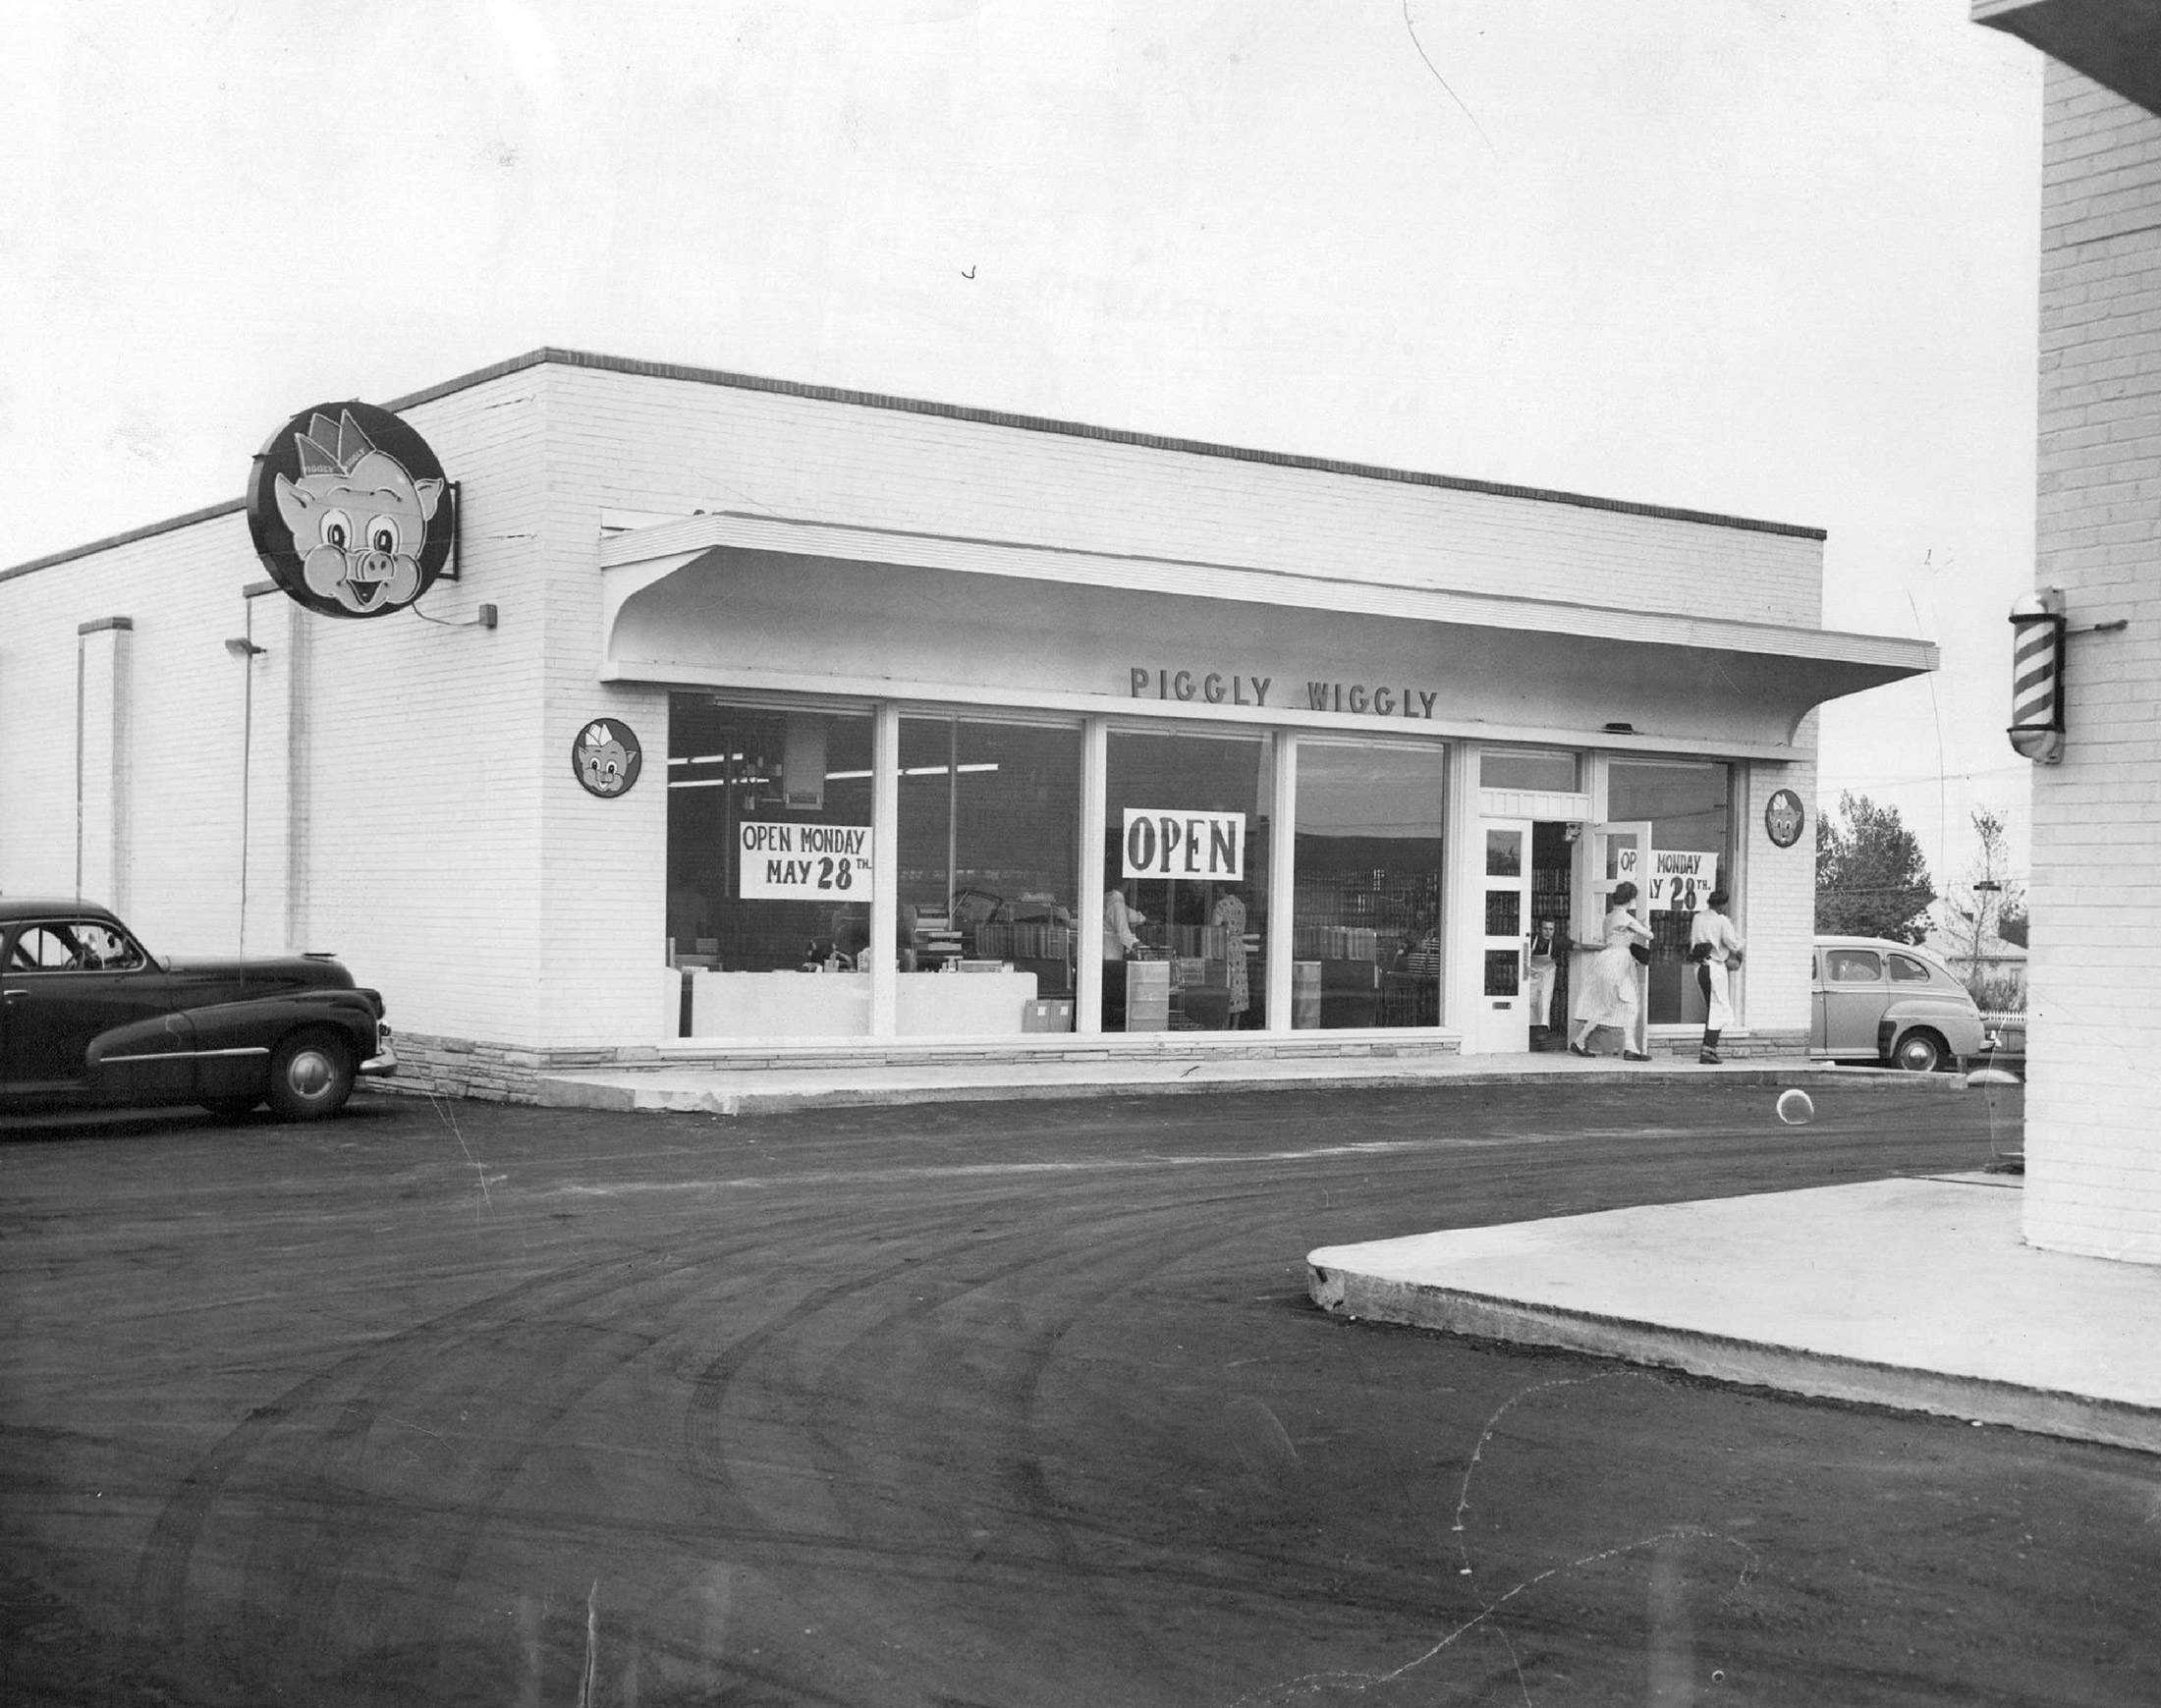 A Piggly Wiggly market located in east Denver, in 1951.
